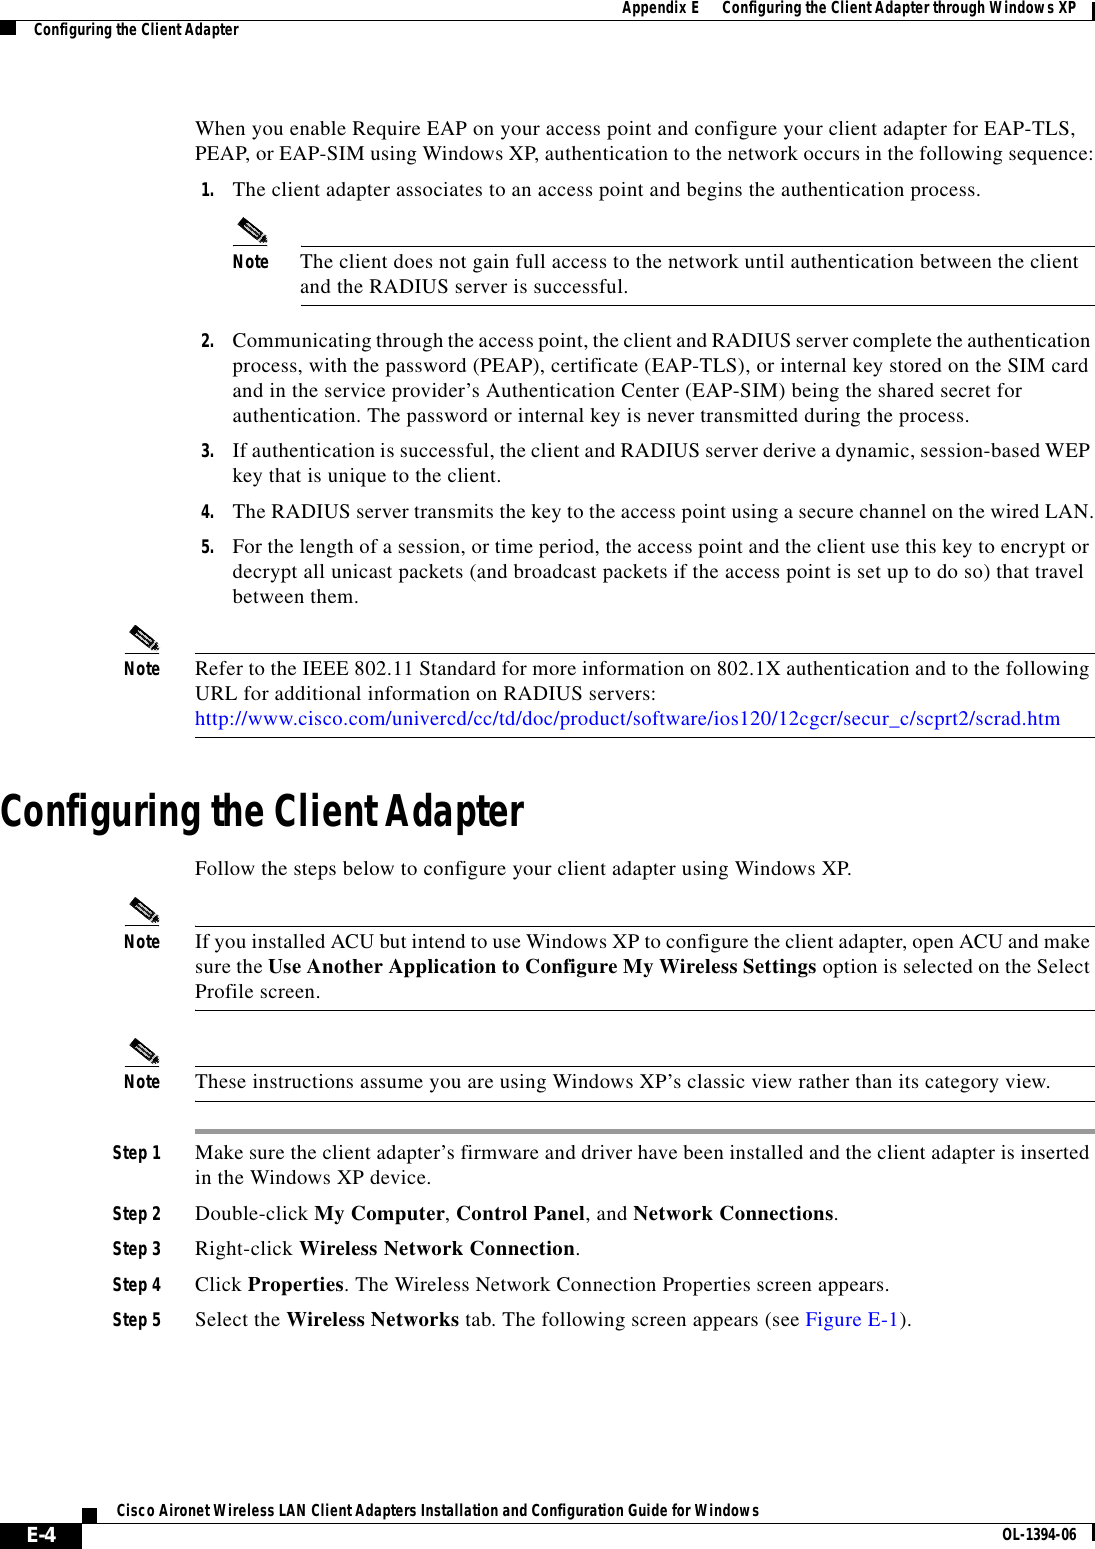 E-4Cisco Aironet Wireless LAN Client Adapters Installation and Configuration Guide for Windows OL-1394-06Appendix E      Configuring the Client Adapter through Windows XPConfiguring the Client AdapterWhen you enable Require EAP on your access point and configure your client adapter for EAP-TLS, PEAP, or EAP-SIM using Windows XP, authentication to the network occurs in the following sequence:1. The client adapter associates to an access point and begins the authentication process.Note The client does not gain full access to the network until authentication between the client and the RADIUS server is successful.2. Communicating through the access point, the client and RADIUS server complete the authentication process, with the password (PEAP), certificate (EAP-TLS), or internal key stored on the SIM card and in the service provider’s Authentication Center (EAP-SIM) being the shared secret for authentication. The password or internal key is never transmitted during the process.3. If authentication is successful, the client and RADIUS server derive a dynamic, session-based WEP key that is unique to the client.4. The RADIUS server transmits the key to the access point using a secure channel on the wired LAN.5. For the length of a session, or time period, the access point and the client use this key to encrypt or decrypt all unicast packets (and broadcast packets if the access point is set up to do so) that travel between them.Note Refer to the IEEE 802.11 Standard for more information on 802.1X authentication and to the following URL for additional information on RADIUS servers: http://www.cisco.com/univercd/cc/td/doc/product/software/ios120/12cgcr/secur_c/scprt2/scrad.htmConfiguring the Client AdapterFollow the steps below to configure your client adapter using Windows XP.Note If you installed ACU but intend to use Windows XP to configure the client adapter, open ACU and make sure the Use Another Application to Configure My Wireless Settings option is selected on the Select Profile screen.Note These instructions assume you are using Windows XP’s classic view rather than its category view.Step 1 Make sure the client adapter’s firmware and driver have been installed and the client adapter is inserted in the Windows XP device.Step 2 Double-click My Computer,Control Panel, and Network Connections.Step 3 Right-click Wireless Network Connection.Step 4 Click Properties. The Wireless Network Connection Properties screen appears.Step 5 Select the Wireless Networks tab. The following screen appears (see Figure E-1).